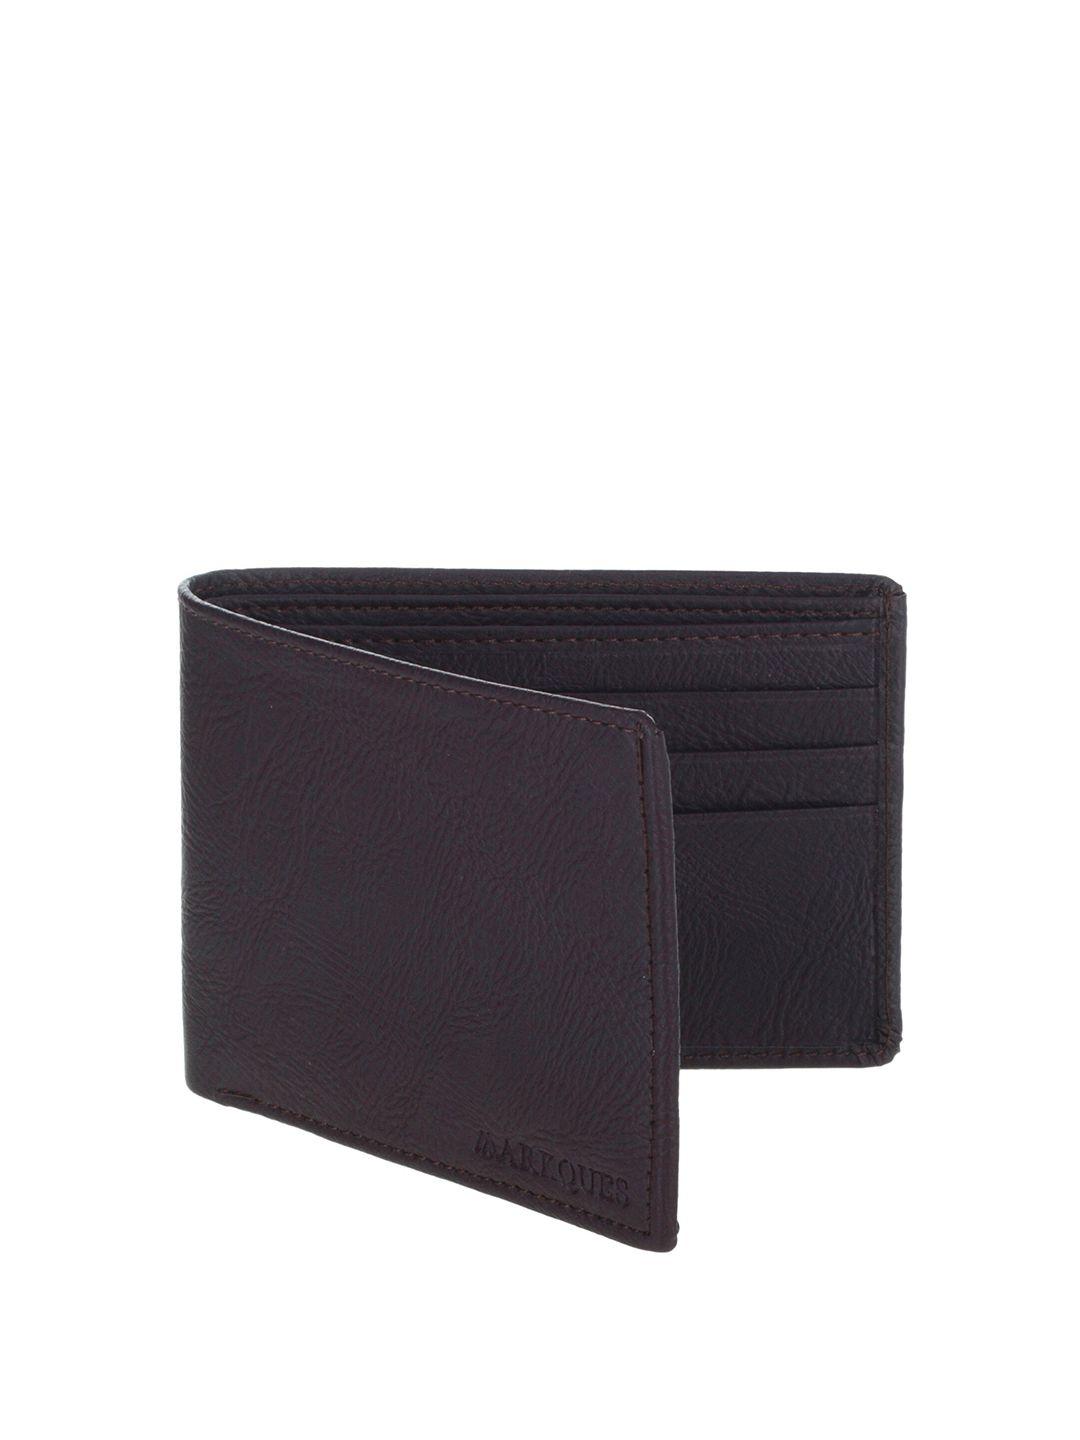 markques men brown leather two fold wallet